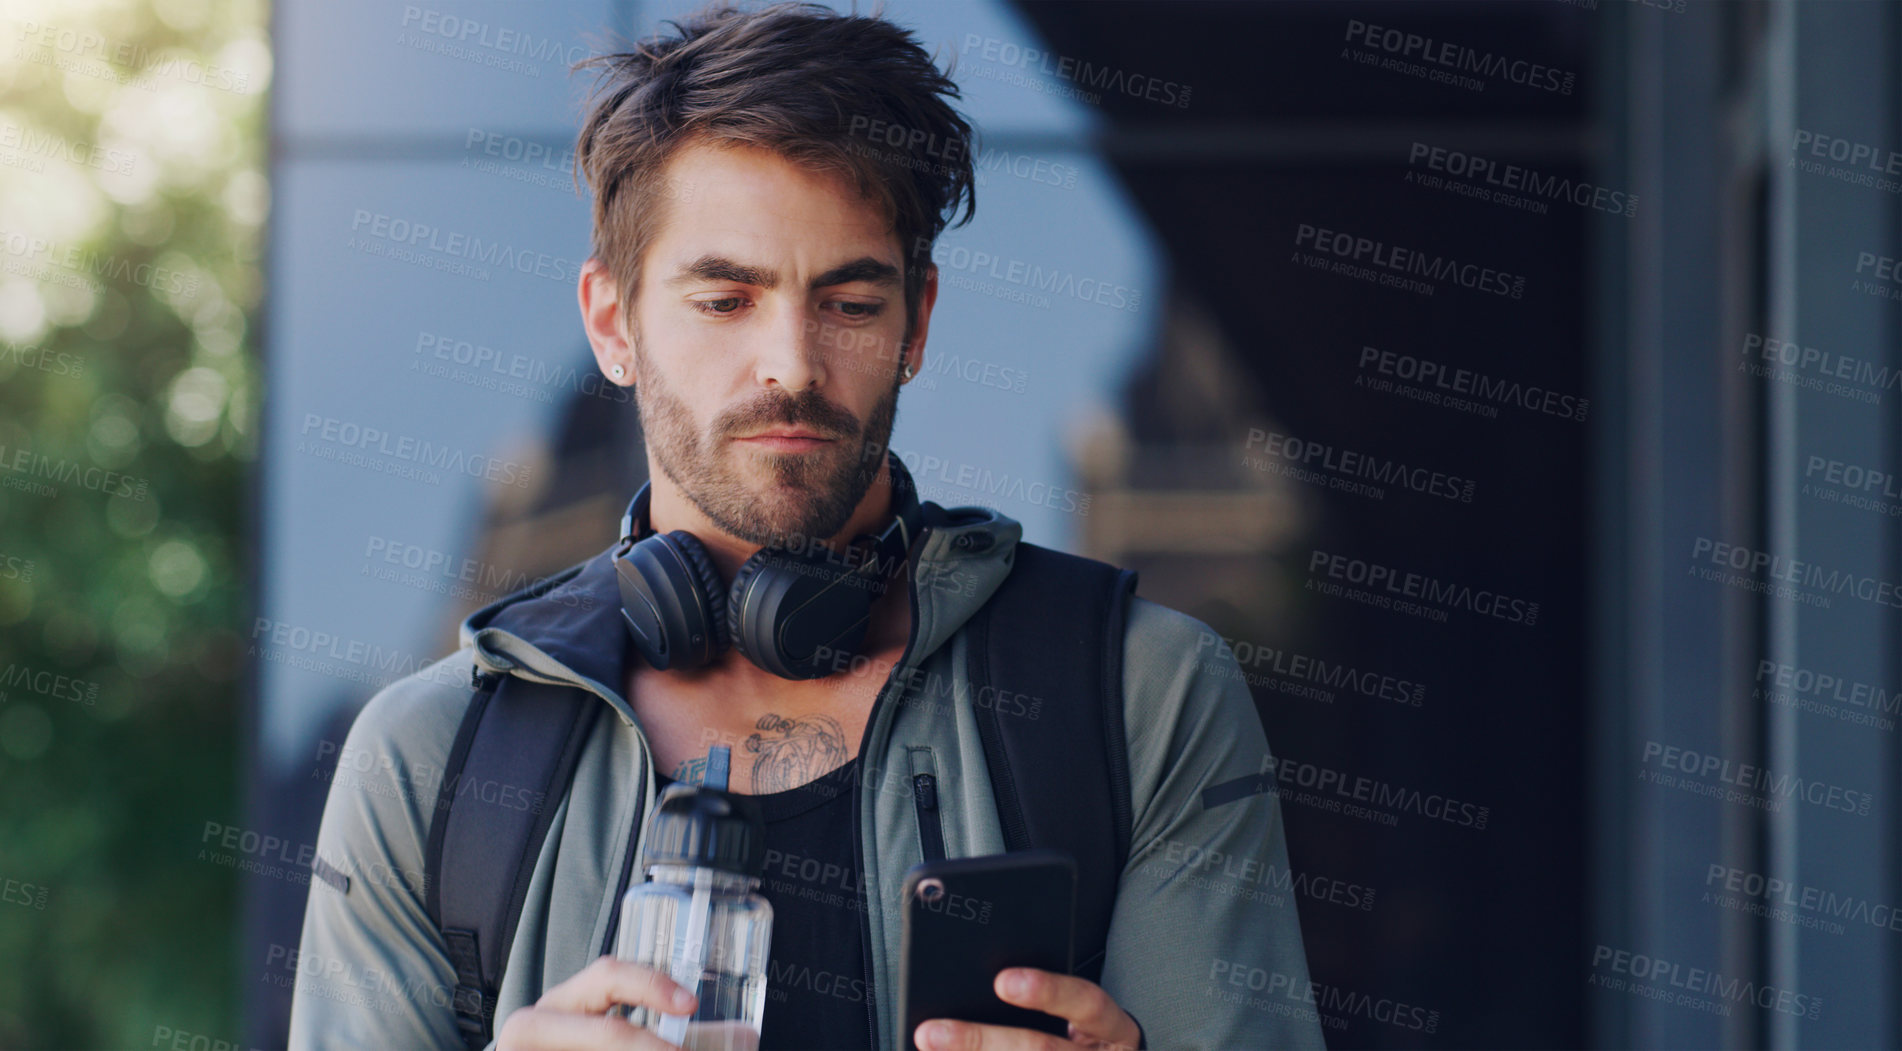 Buy stock photo Shot of a man walking outside wearing headphones and using his cellphone